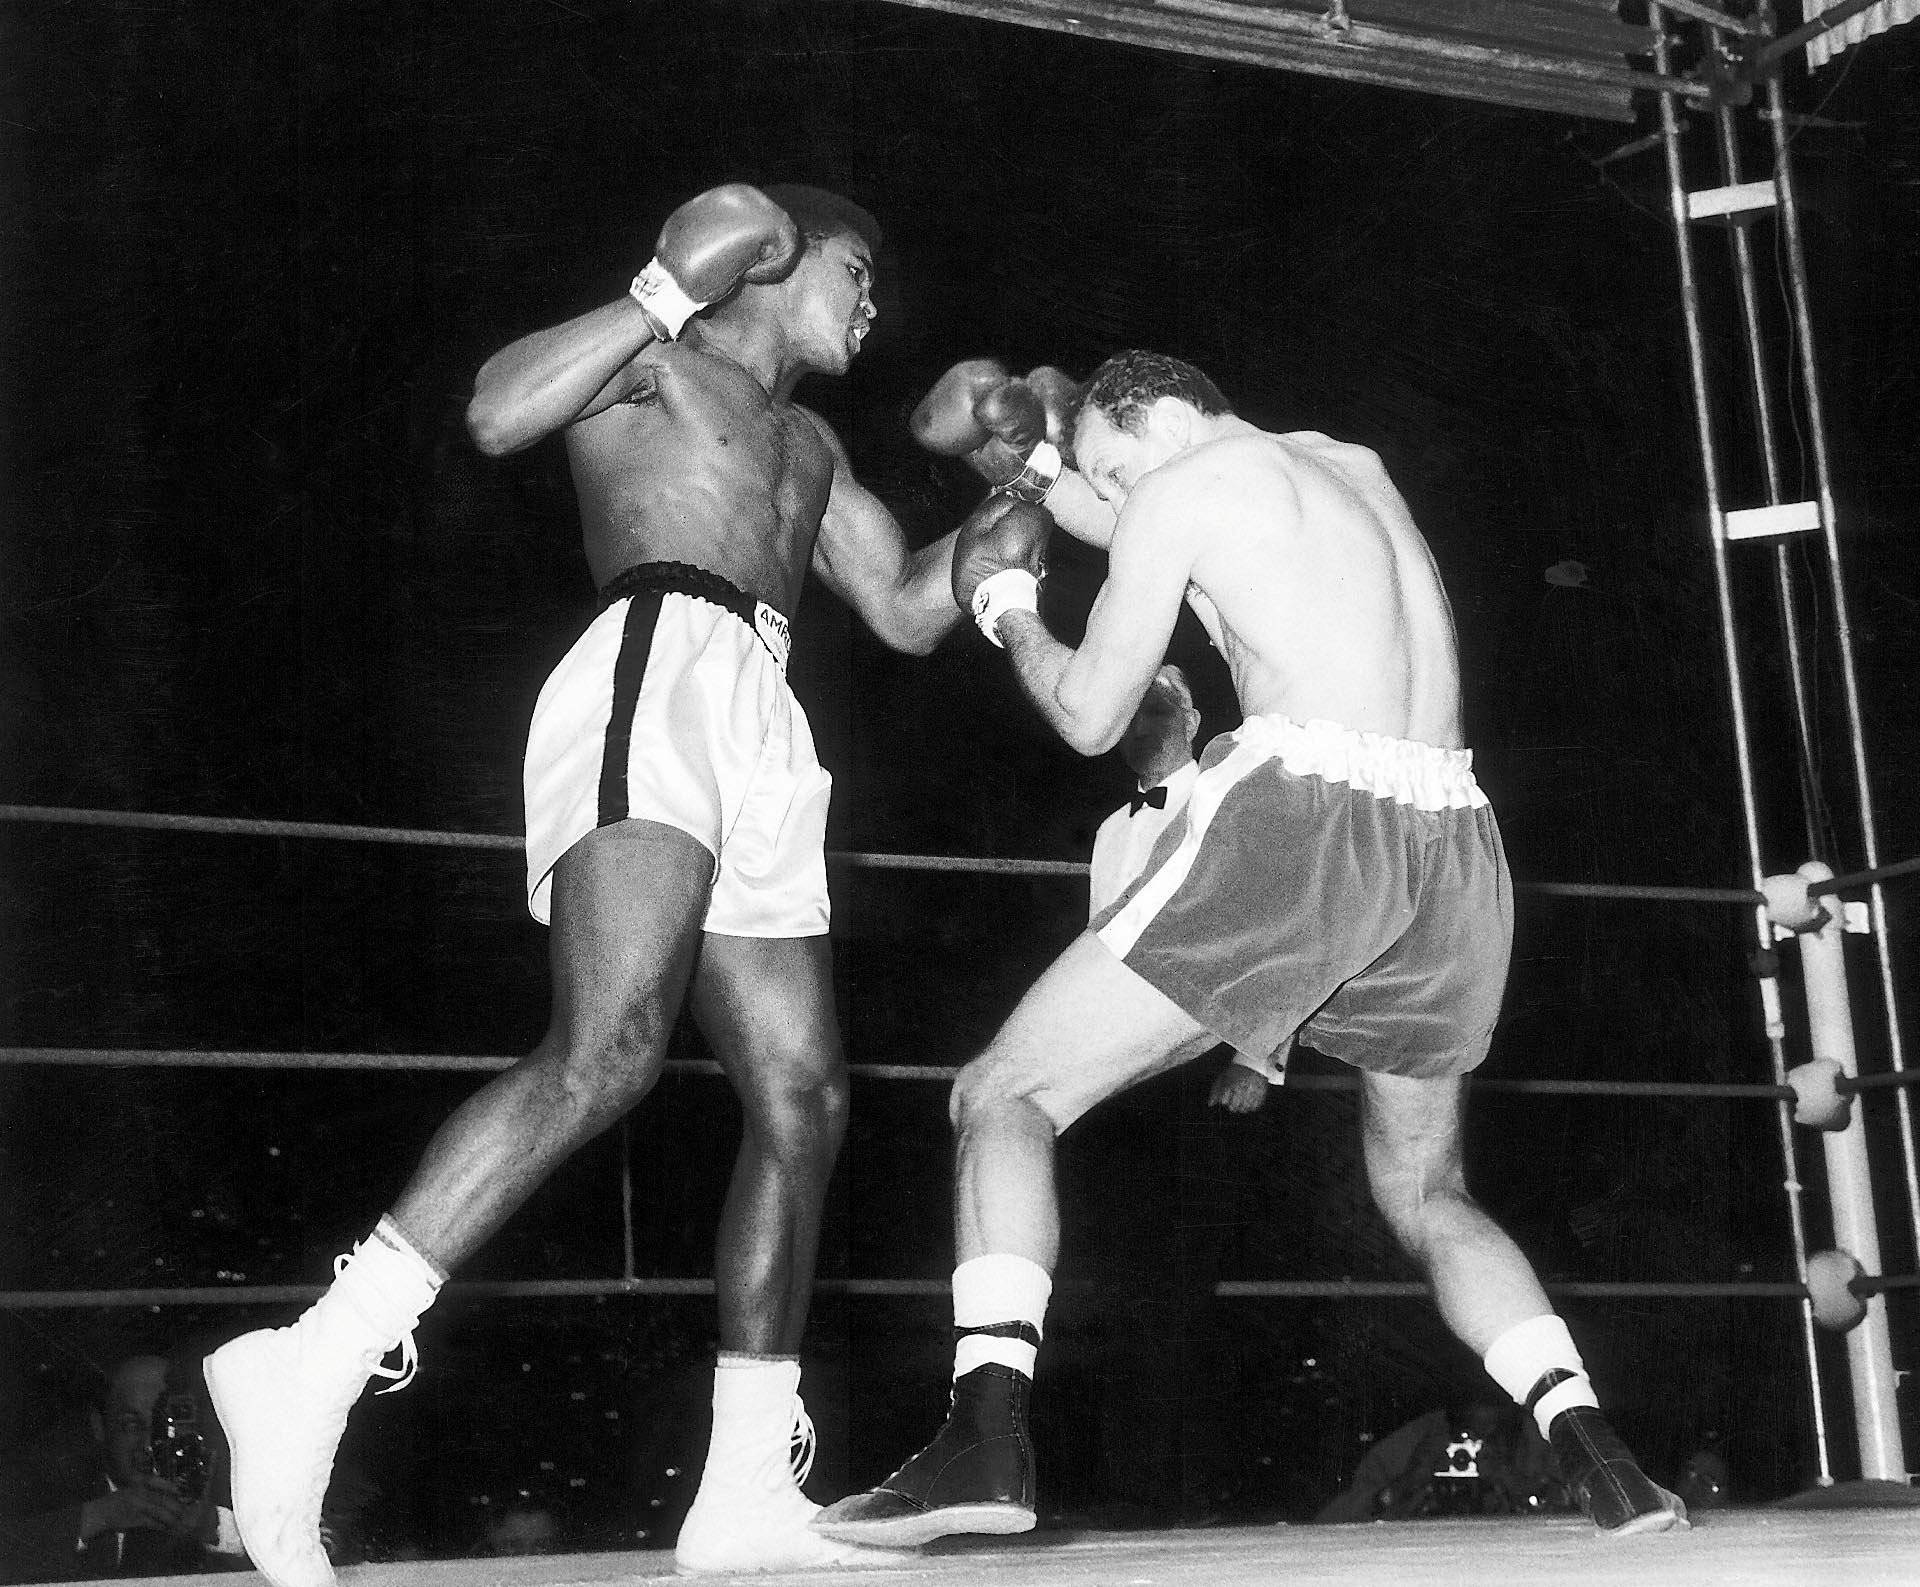  Cassius Clay, (later Muhammad Ali) fights Henry Cooper at Wembley Stadium in London